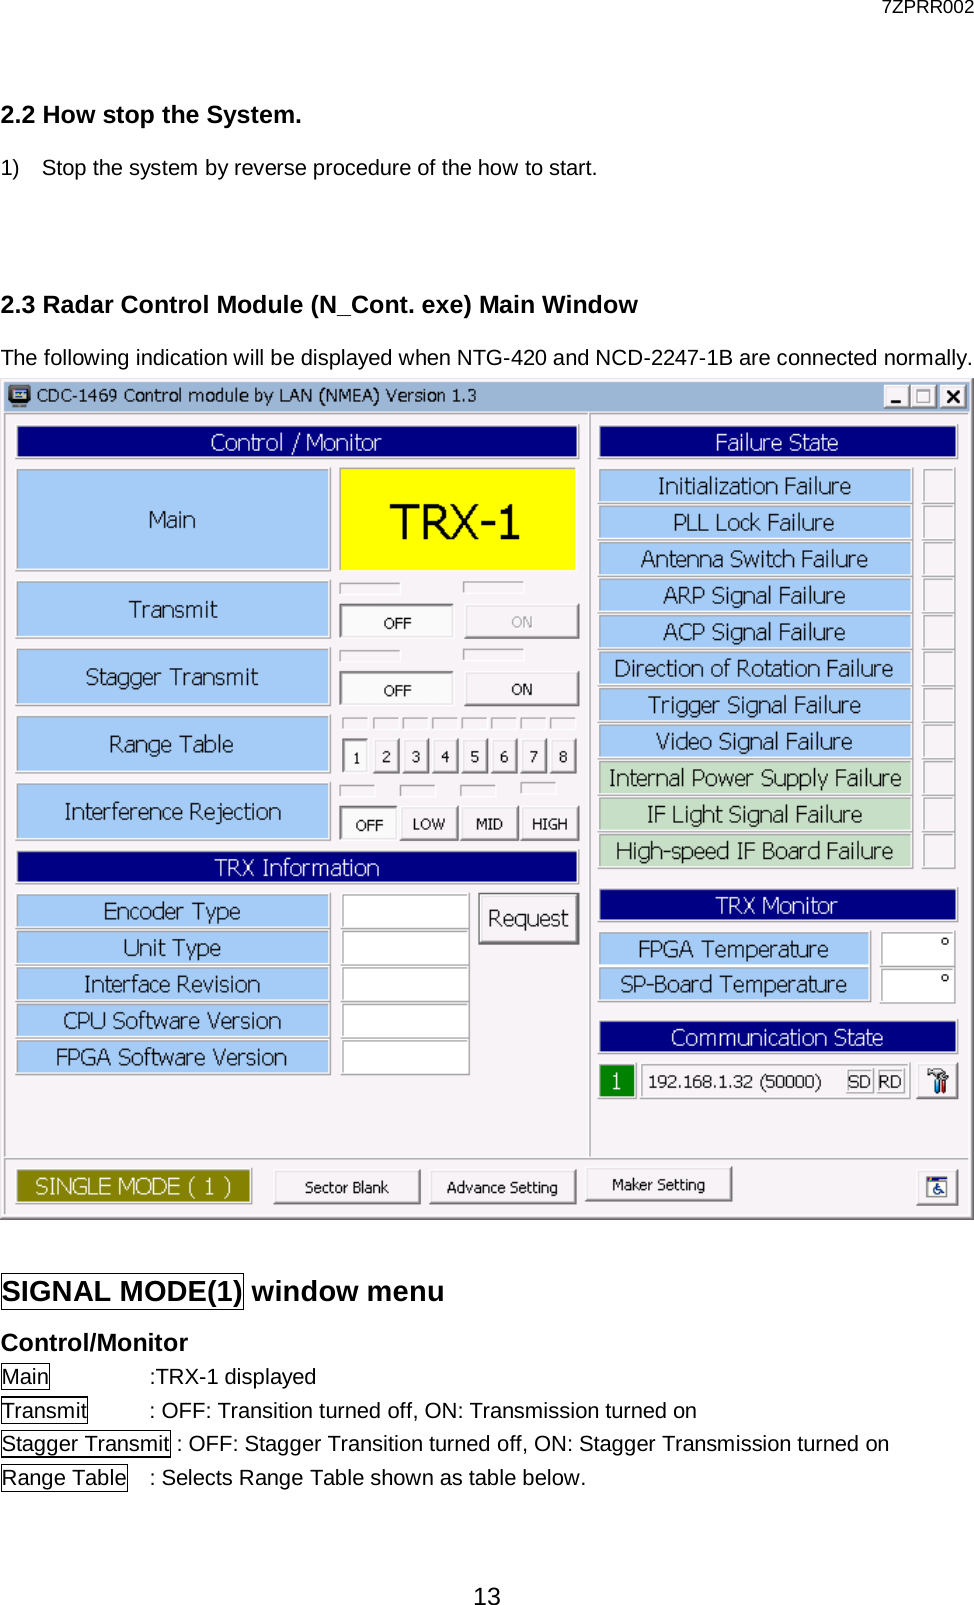  7ZPRR002 13 2.2 How stop the System. 1)  Stop the system by reverse procedure of the how to start.   2.3 Radar Control Module (N_Cont. exe) Main Window The following indication will be displayed when NTG-420 and NCD-2247-1B are connected normally.   SIGNAL MODE(1) window menu Control/Monitor Main        :TRX-1 displayed Transmit      : OFF: Transition turned off, ON: Transmission turned on Stagger Transmit : OFF: Stagger Transition turned off, ON: Stagger Transmission turned on Range Table  : Selects Range Table shown as table below.  